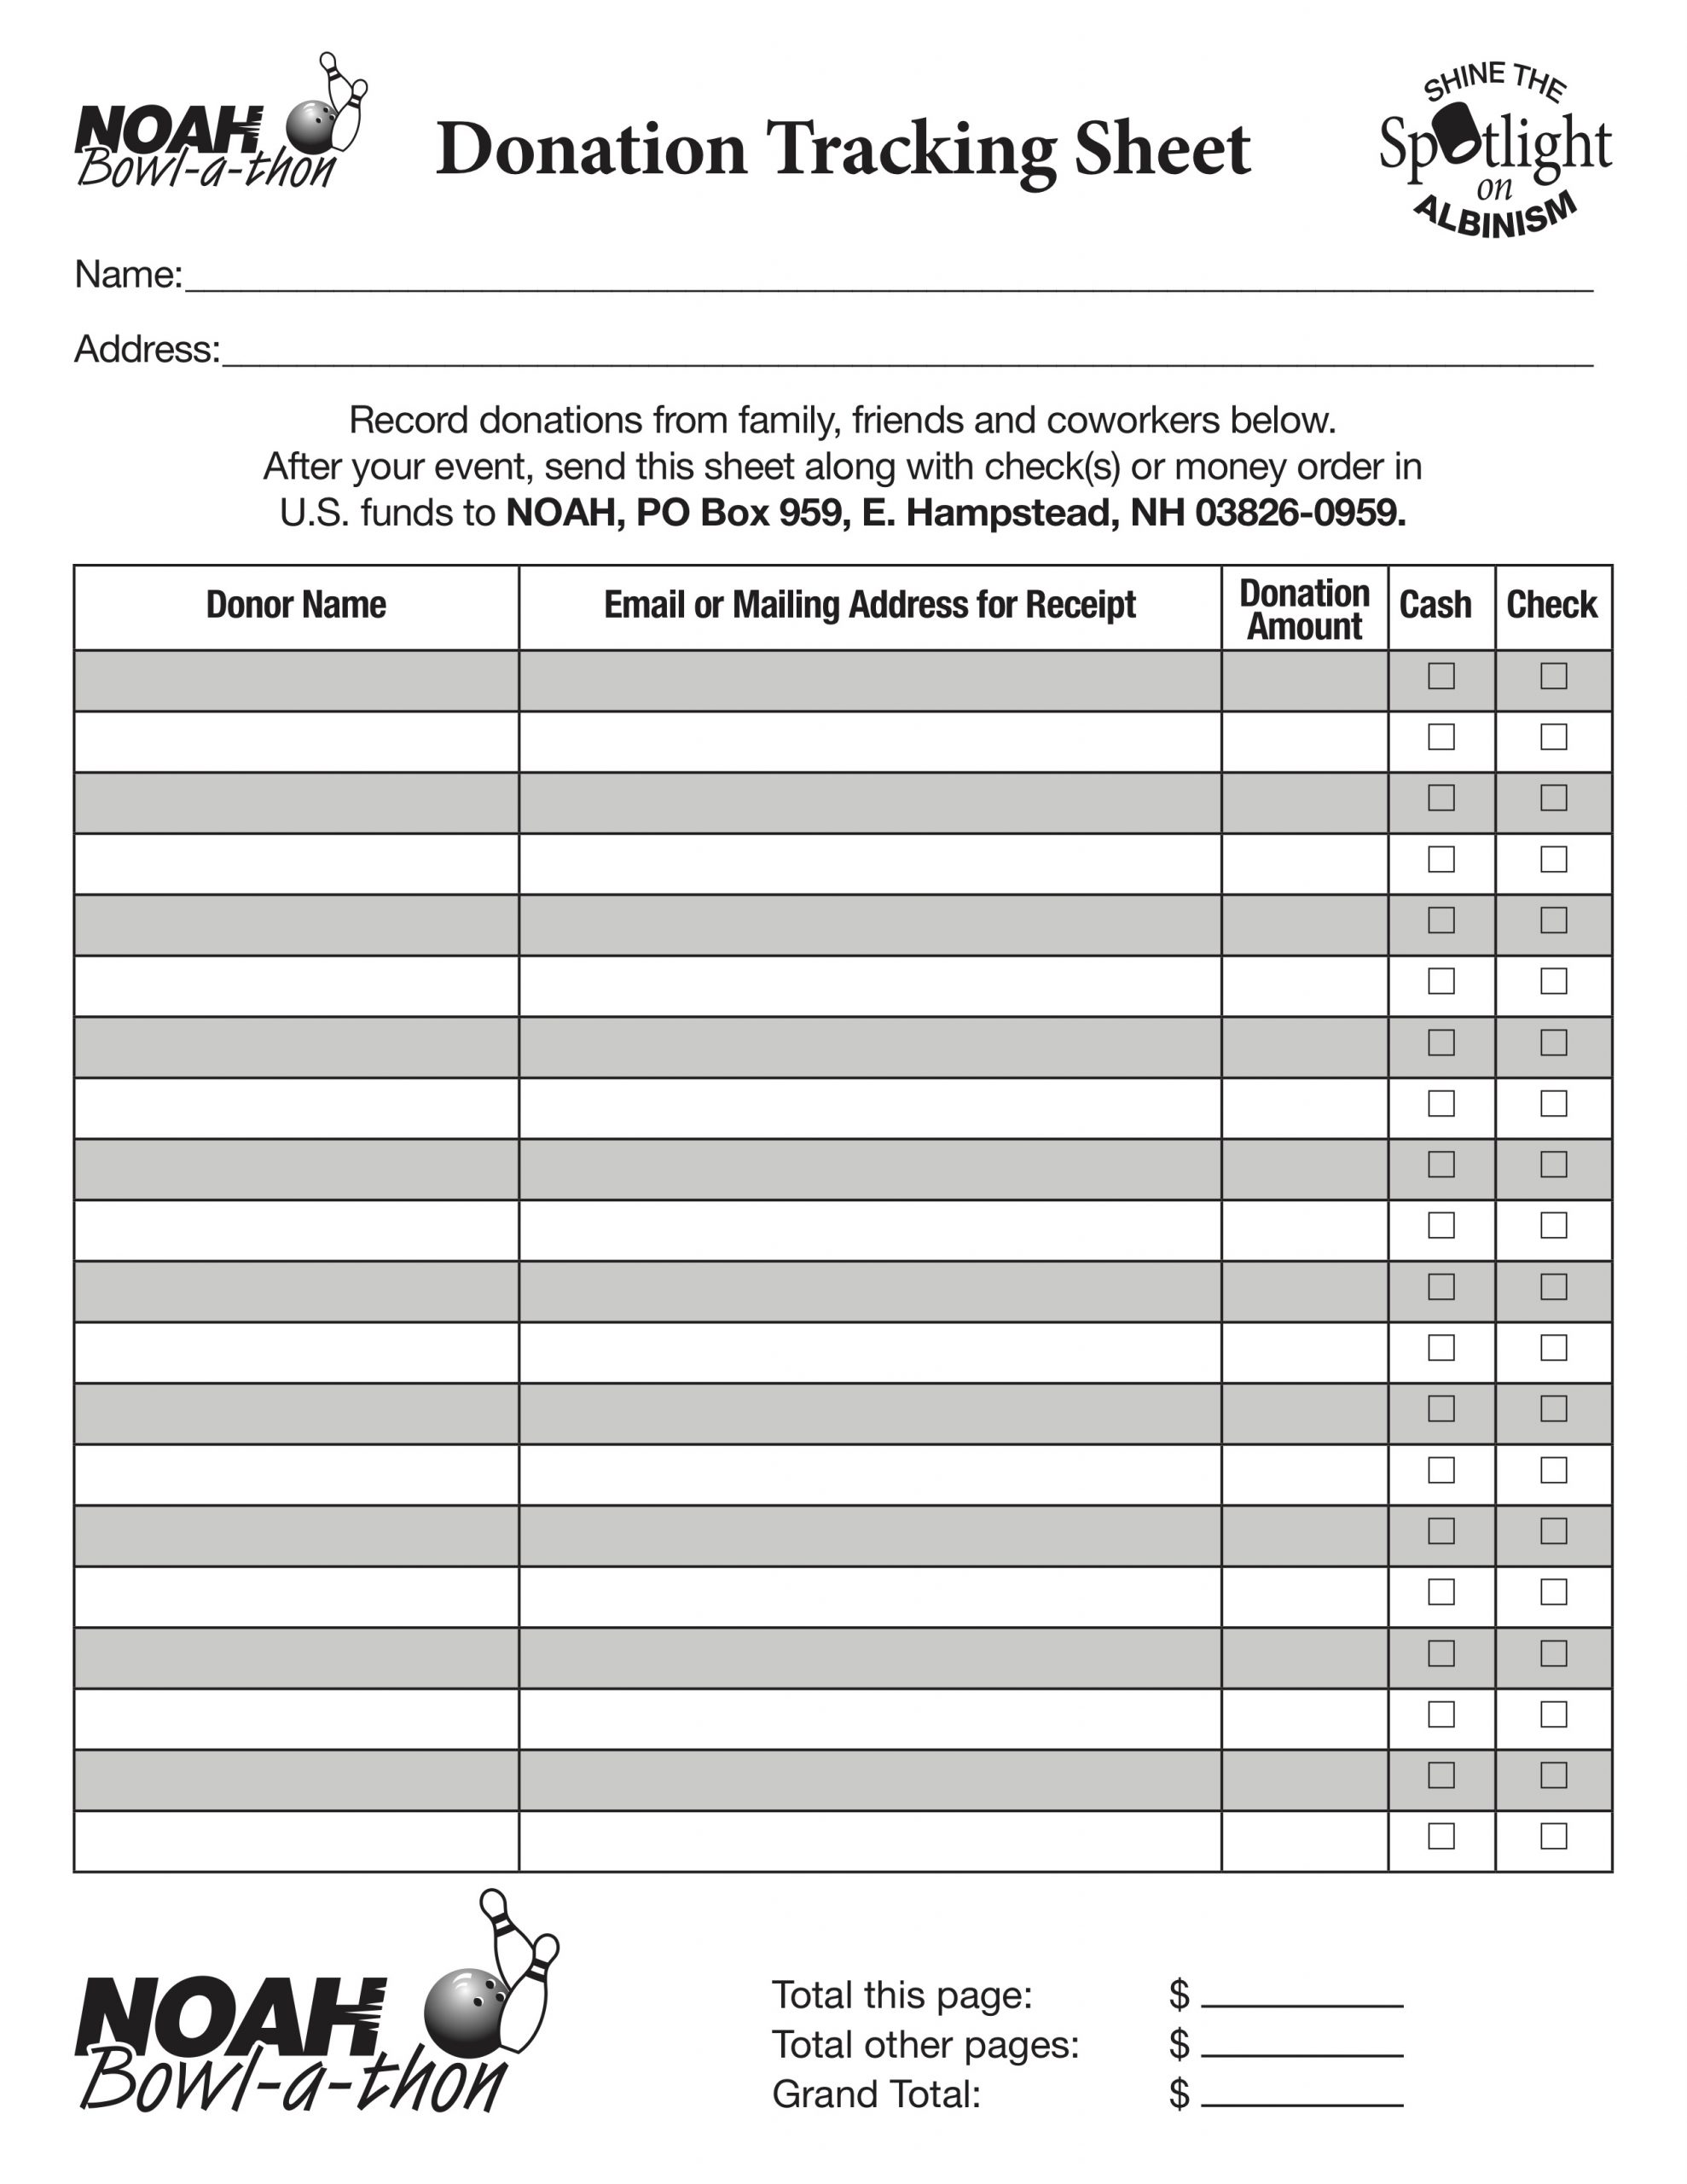 Bowl-a-thon Fundraiser Donation Tracking Sheet